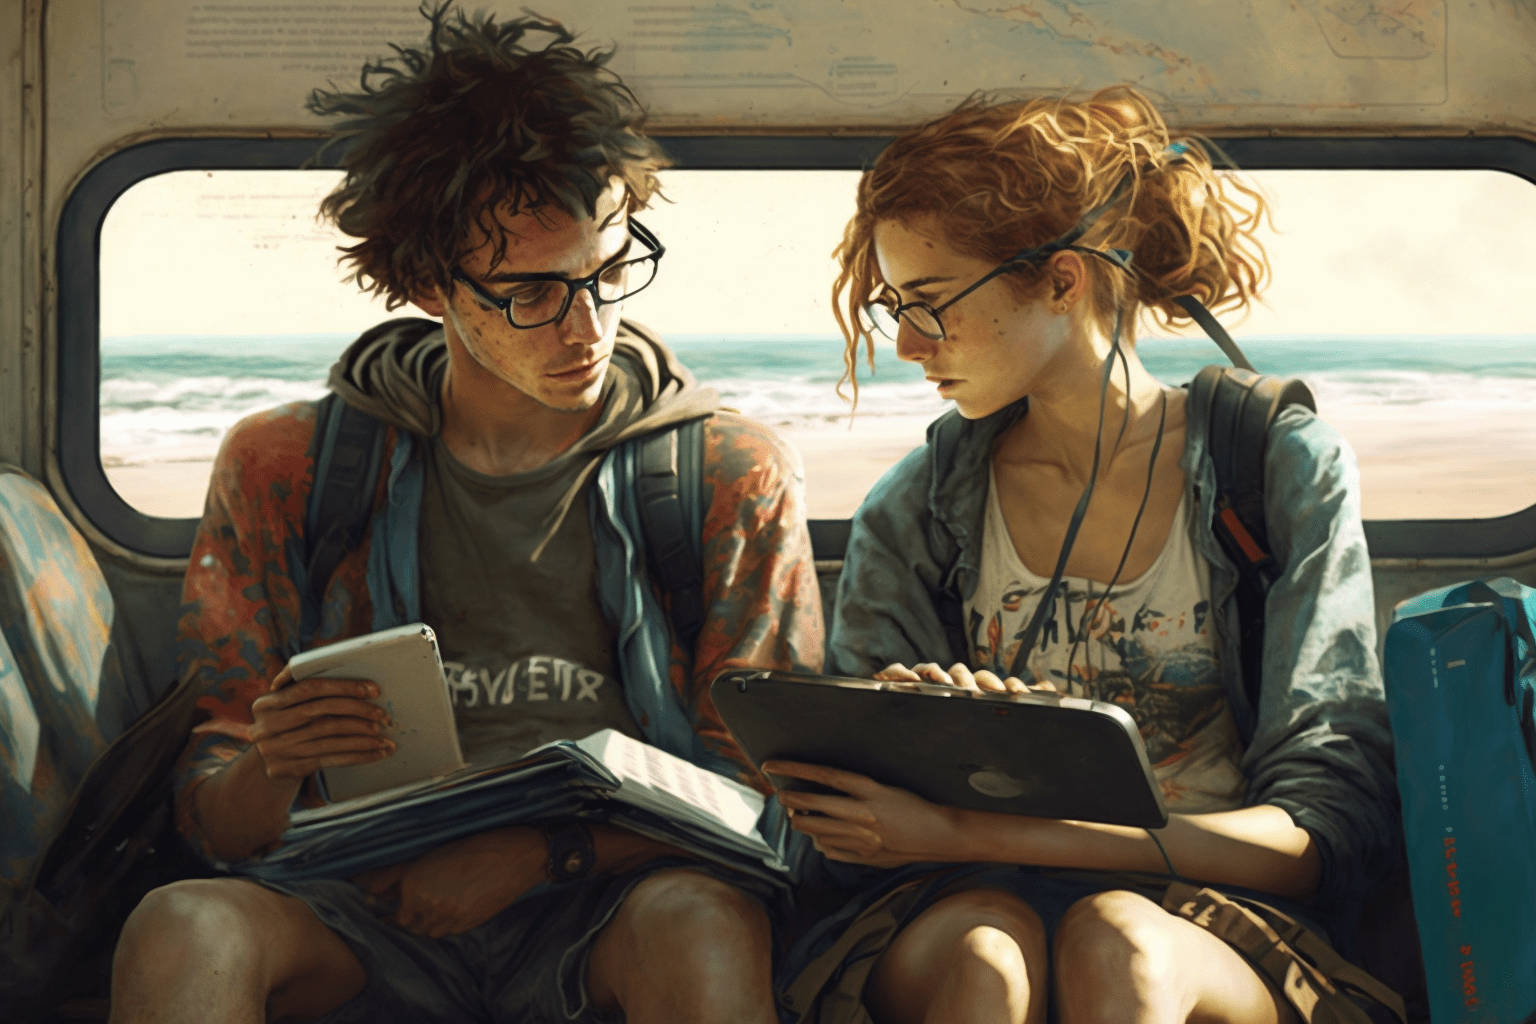 couple teenage of nomadic travelers, using a calculator, sitting at a desk with a backpacks next to them, at a beach, sunny environment